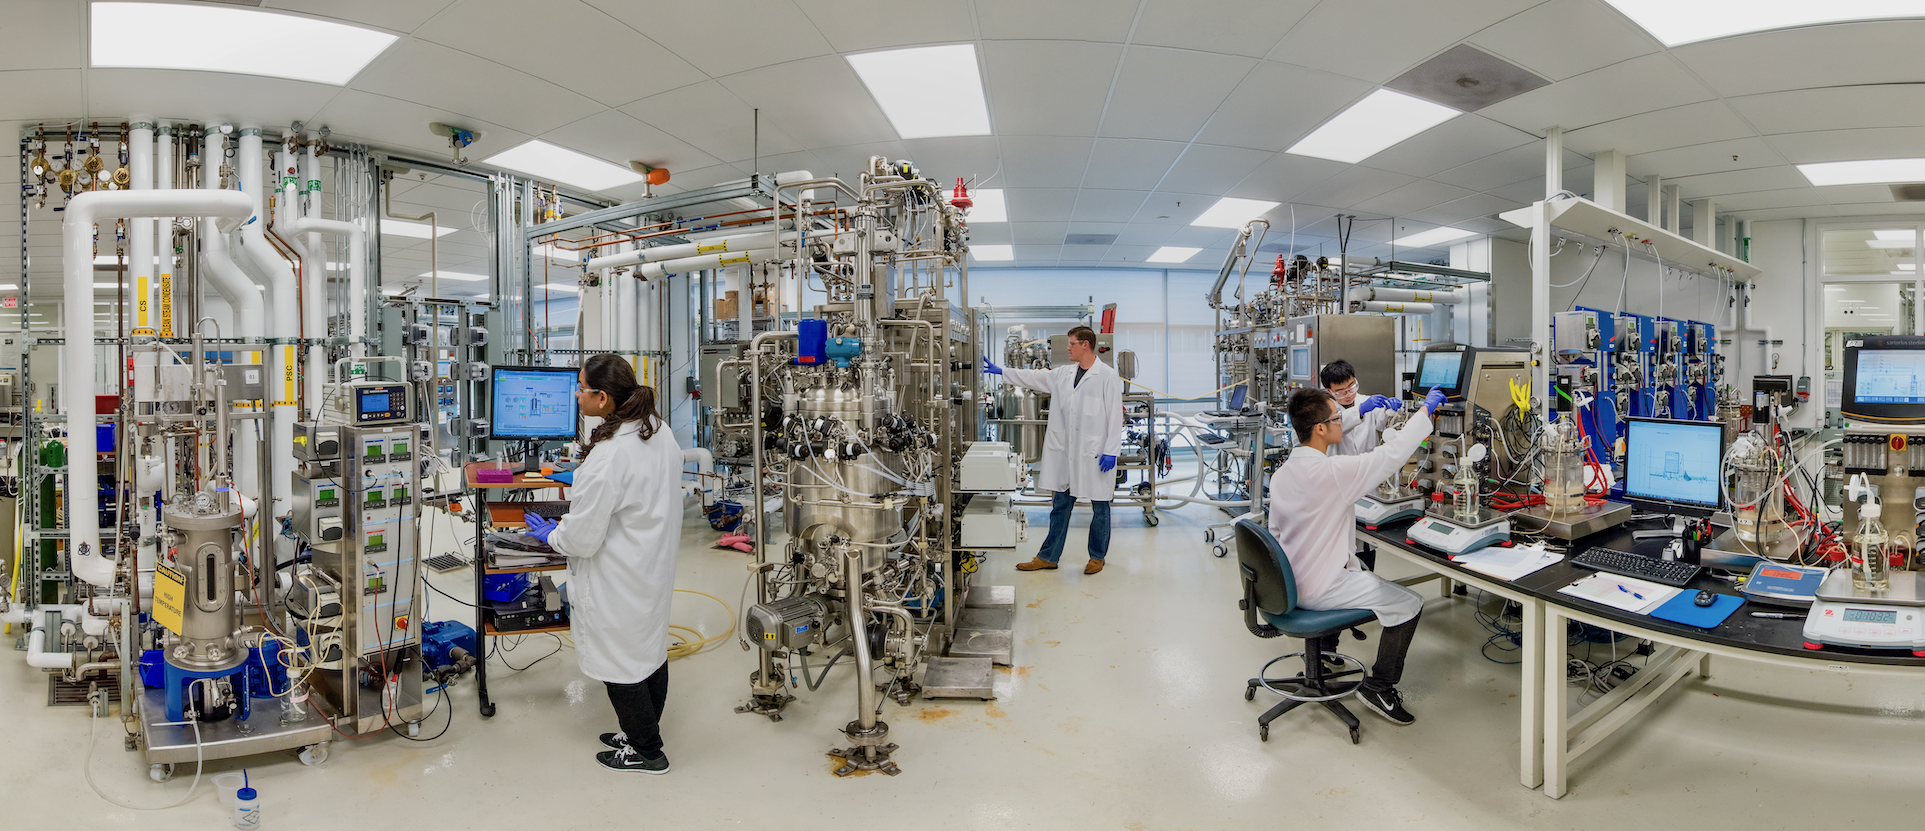 Photograph depicting a panoramic view of laboratory space inside the ABPDU facility, located in Emeryville, CA.